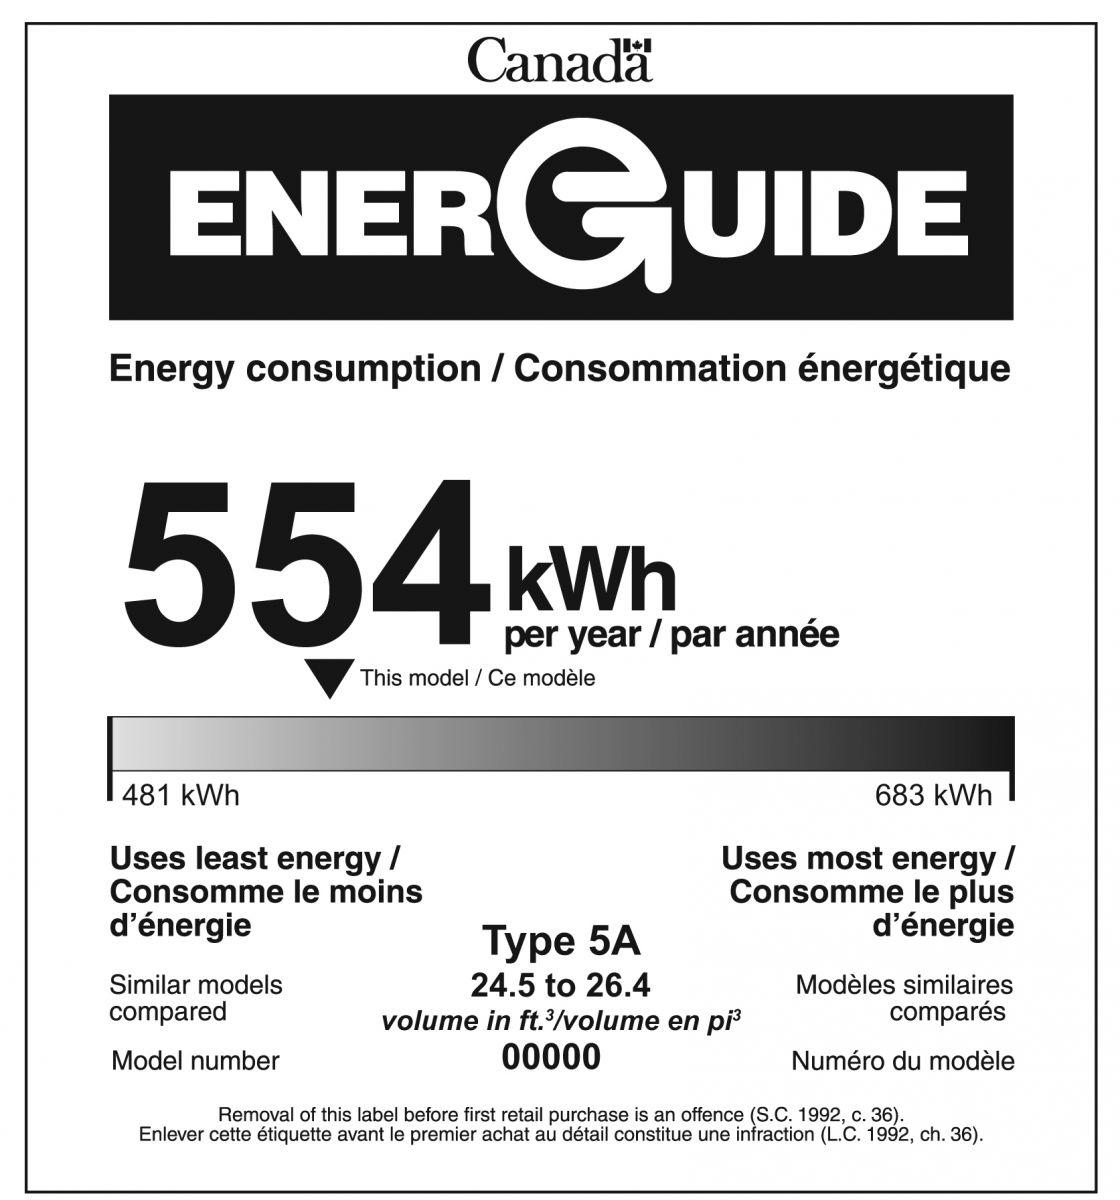 Example of a EnerGuide label for appliances